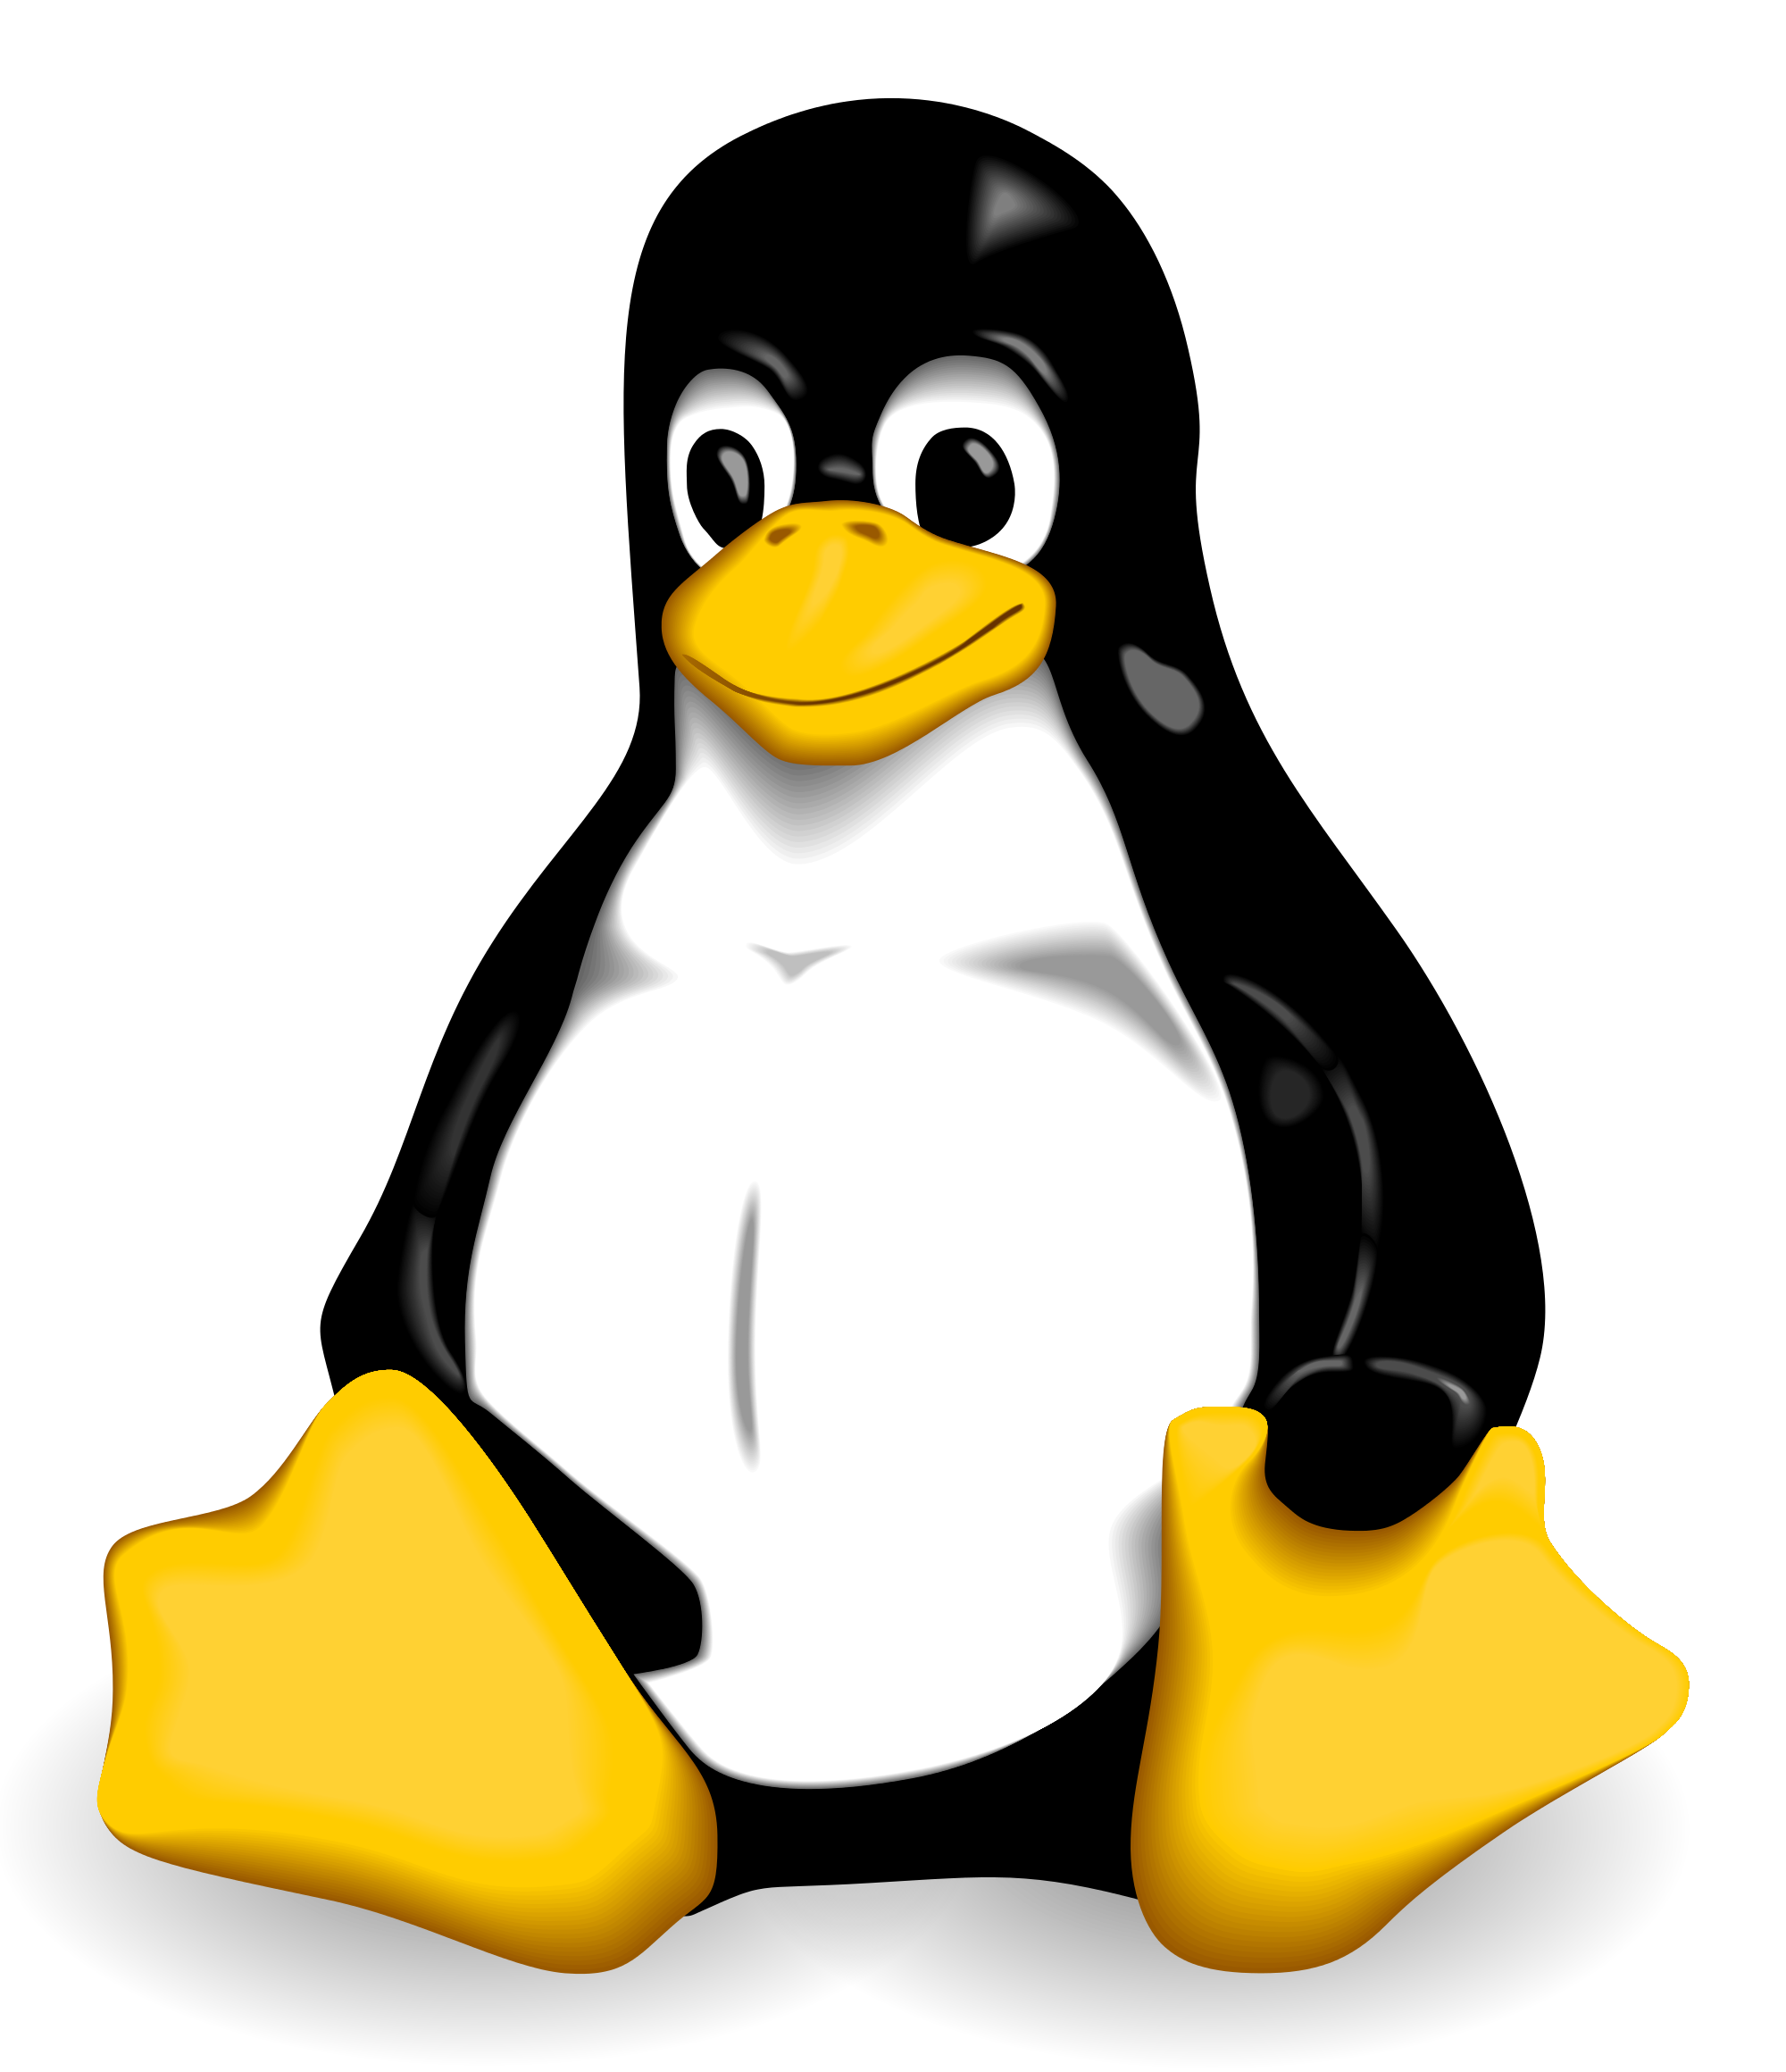 Linux e data science